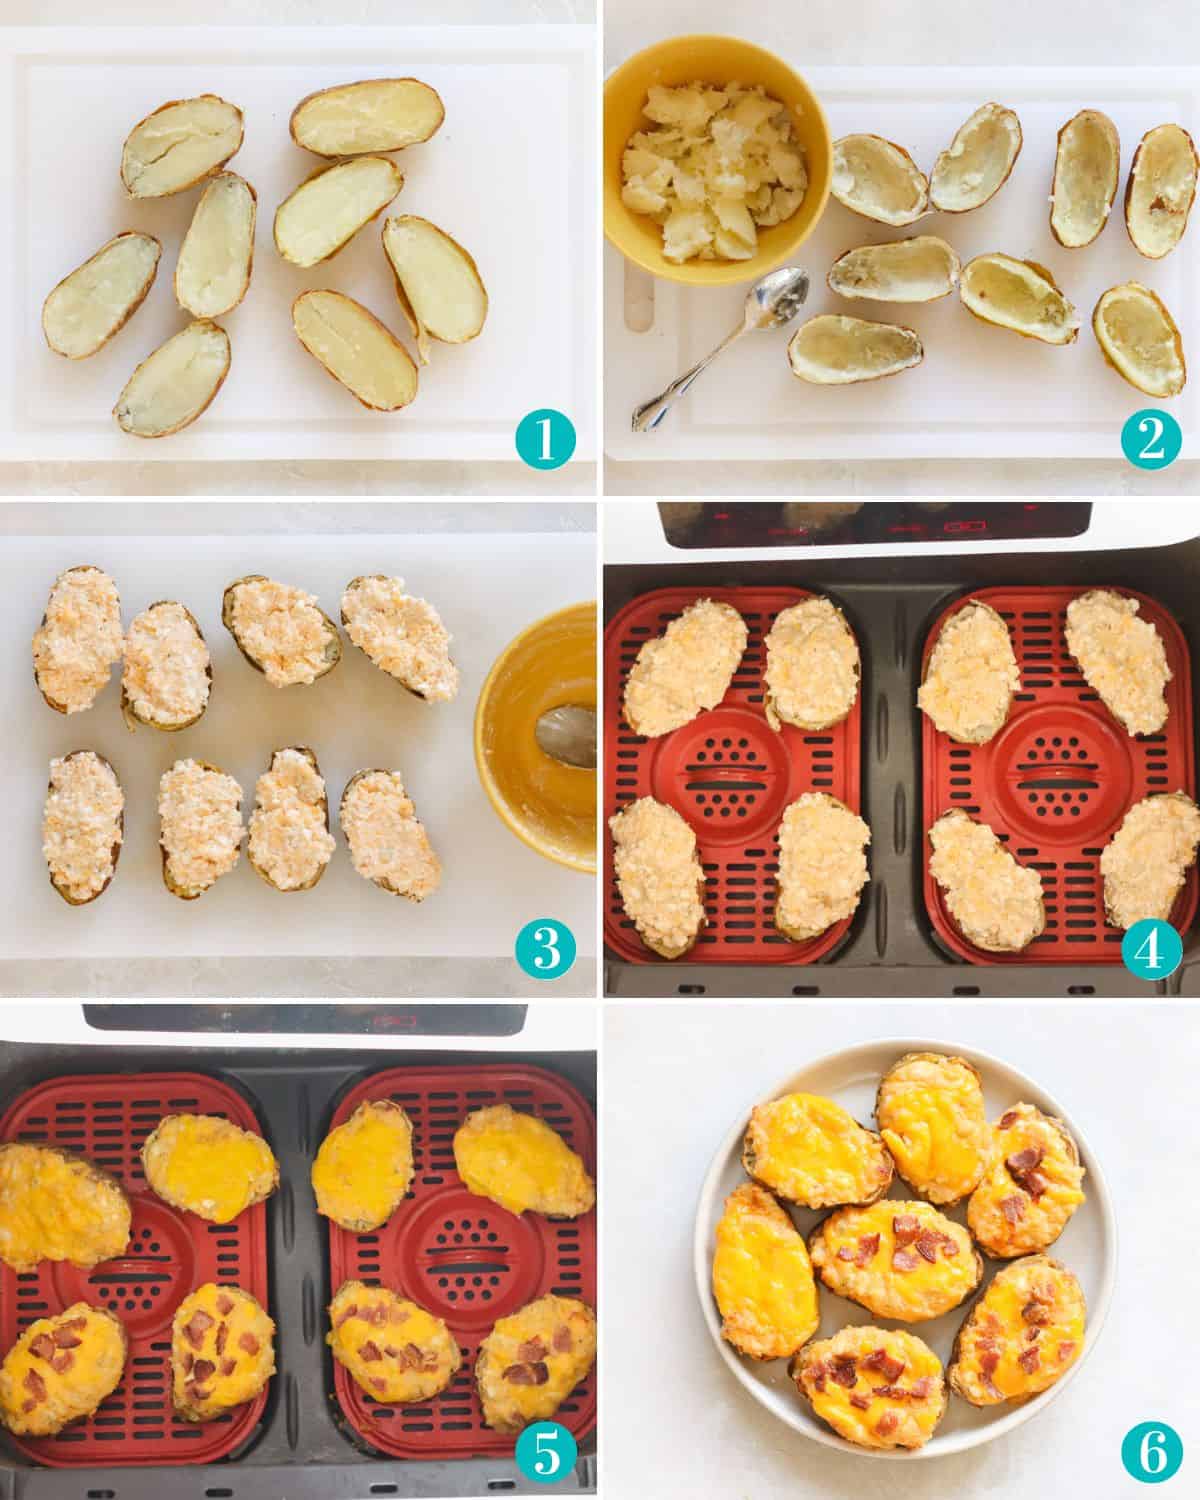 six photo collage of baked potatoes cut in half on a cutting board, potatoes scooped out on cutting board with a bowl of potato, potato halves filled with cheese potato mixture, potato halves in air fryer, baked twice baked potatoes in air fryer, plate of twice baked potatoes